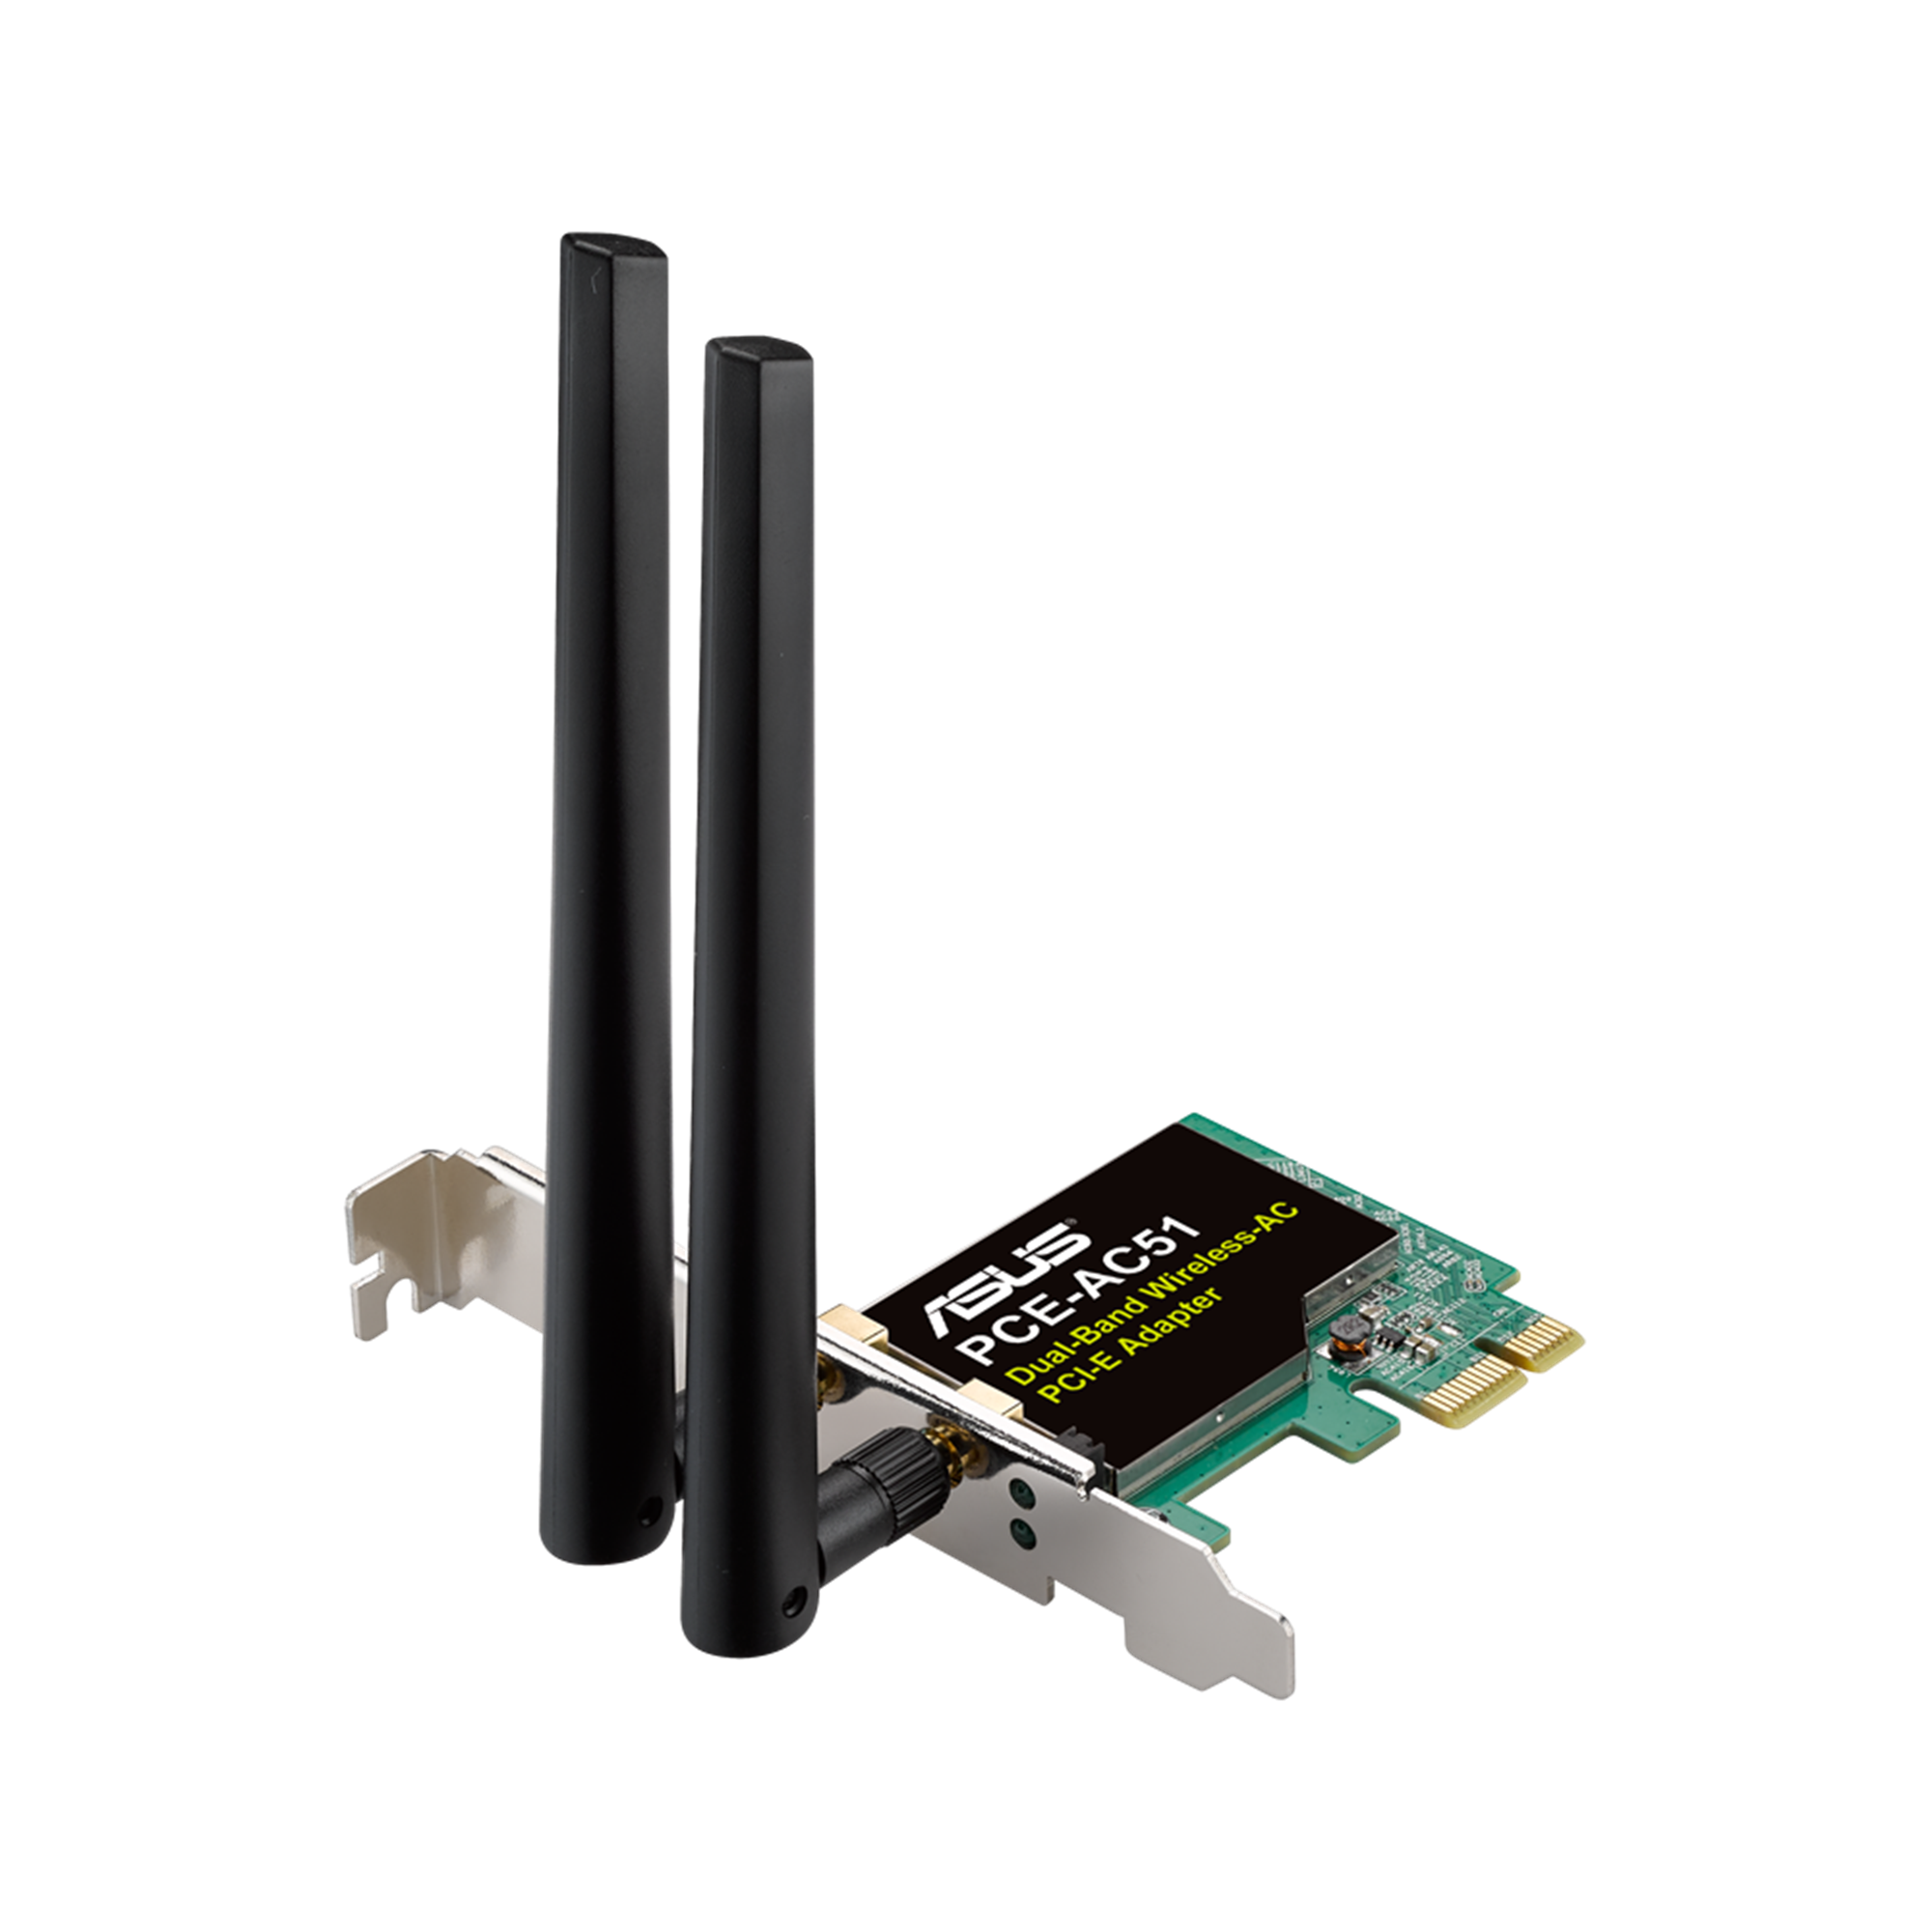 screw residue questionnaire PCE-AC51｜Wireless & Wired Adapters｜ASUS USA